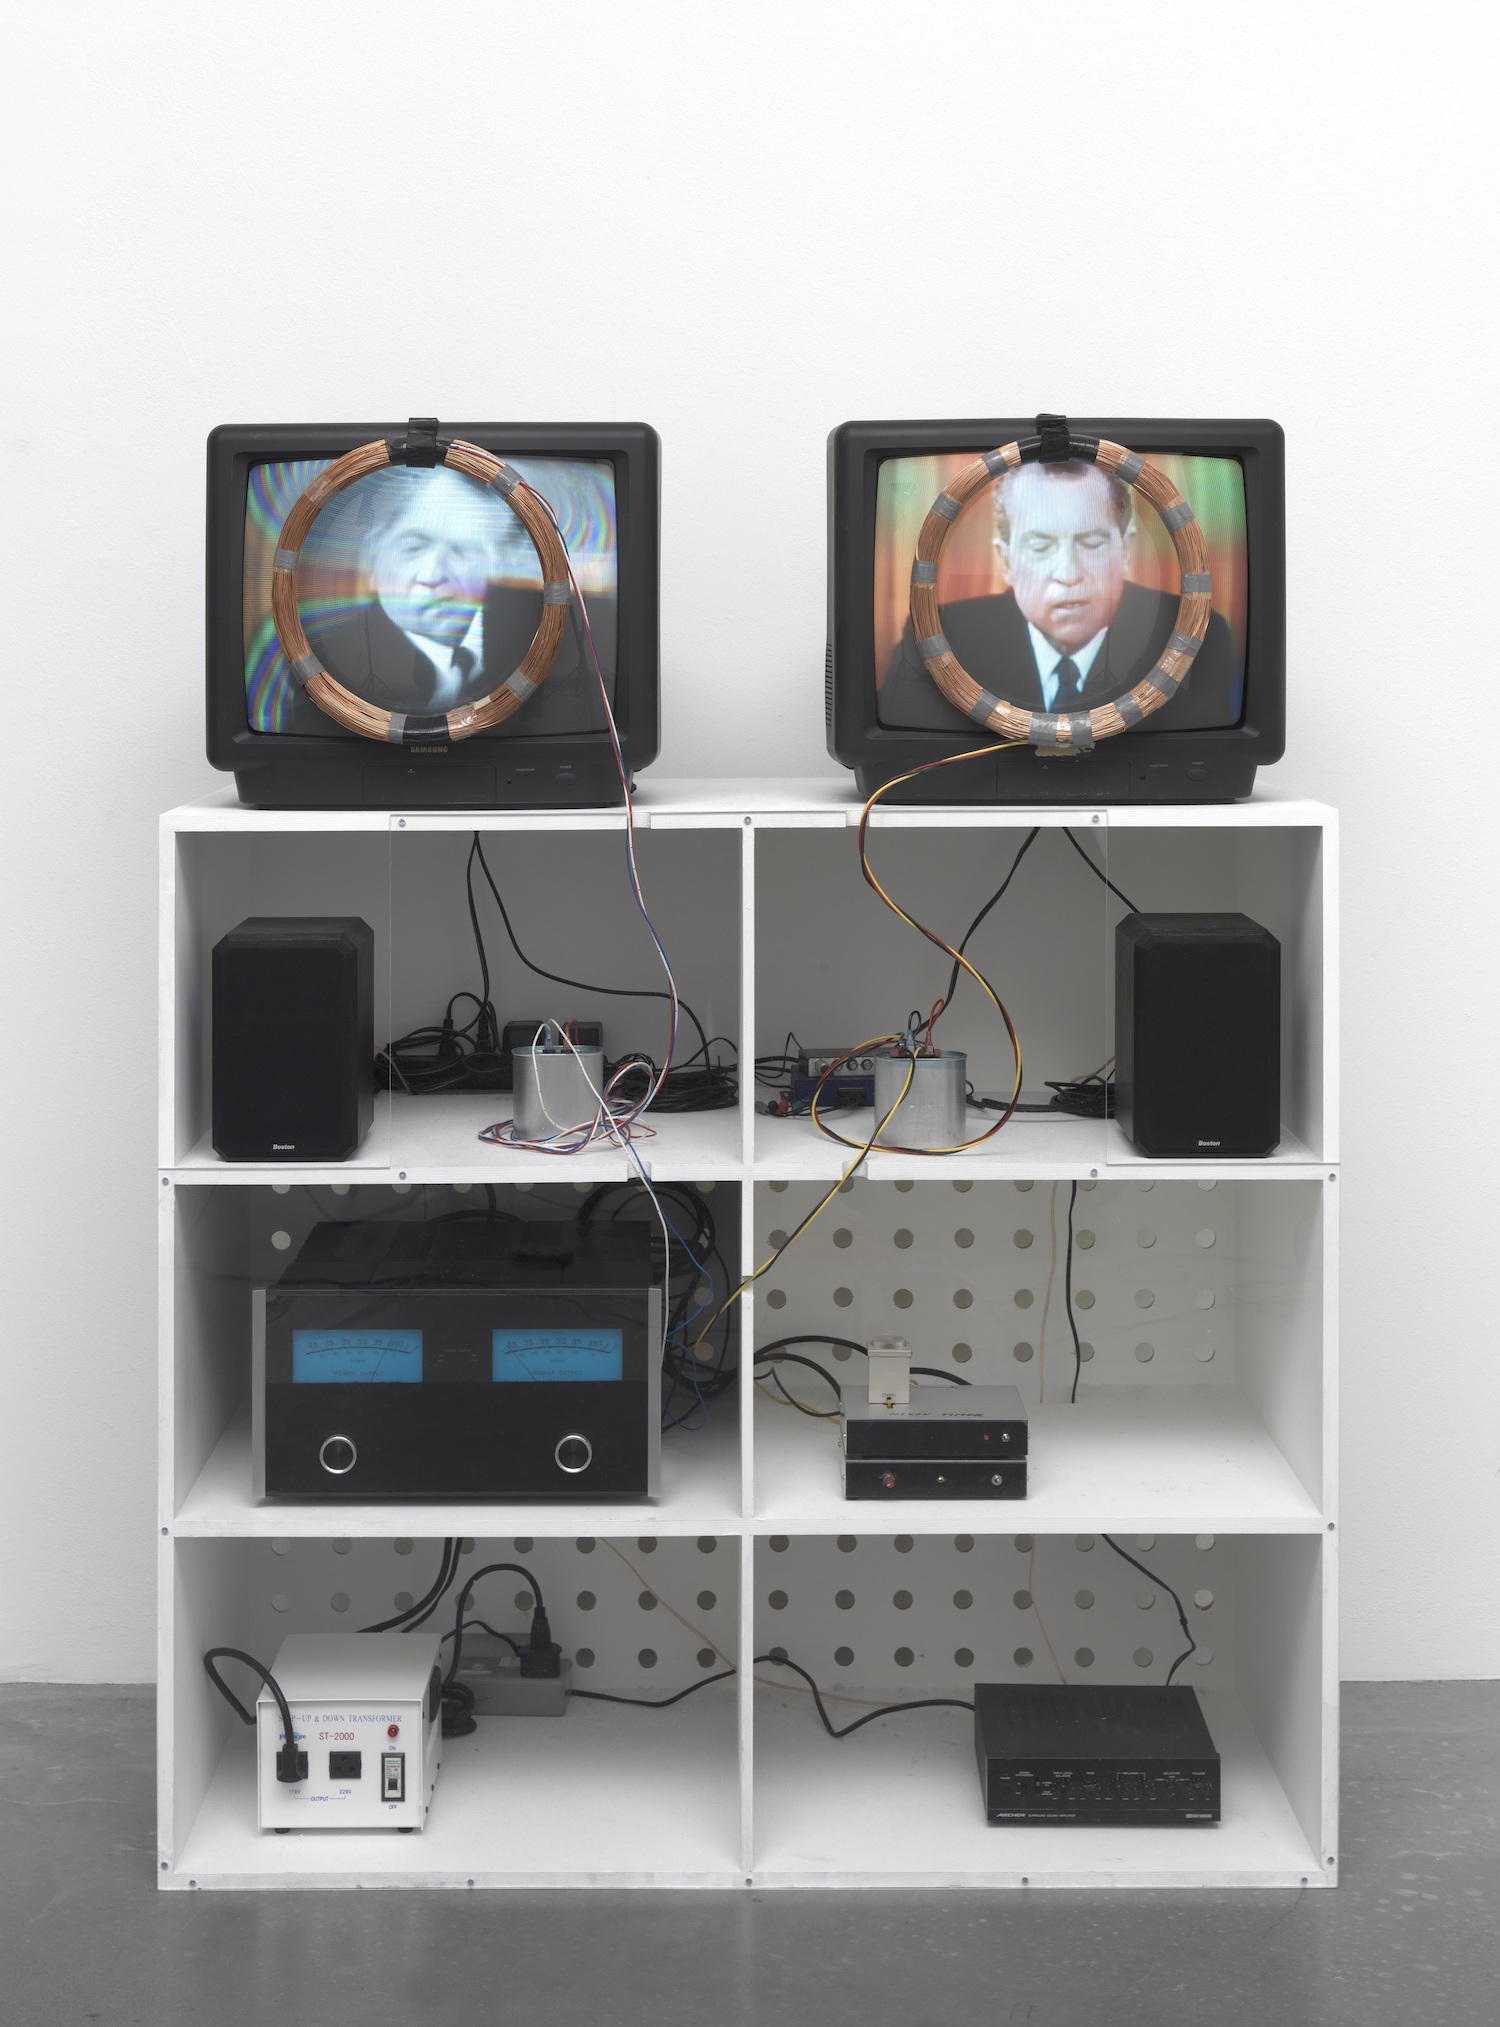 Nam June Paik, Nixon 1965-2002. Tate, Purchased with funds provided by Hyundai Motor Company